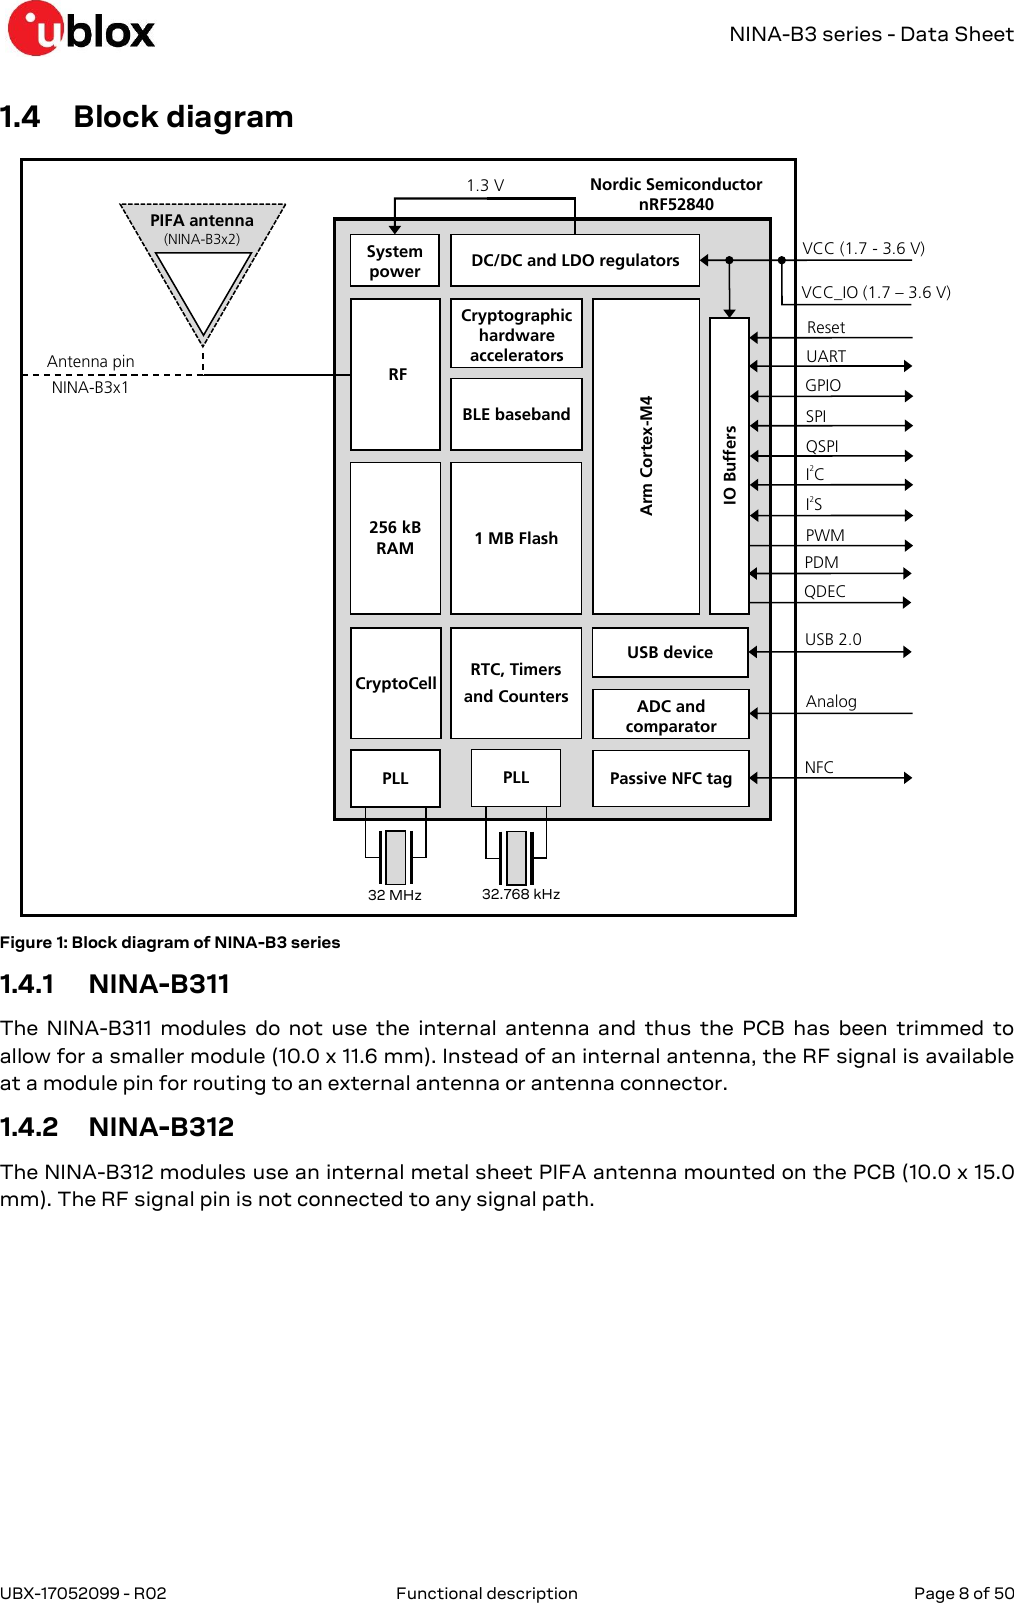   NINA-B3 series - Data Sheet UBX-17052099 - R02  Functional description   Page 8 of 50      1.4 Block diagram  Figure 1: Block diagram of NINA-B3 series 1.4.1 NINA-B311 The  NINA-B311  modules  do not  use  the  internal  antenna  and  thus the  PCB  has been  trimmed  to allow for a smaller module (10.0 x 11.6 mm). Instead of an internal antenna, the RF signal is available at a module pin for routing to an external antenna or antenna connector. 1.4.2 NINA-B312 The NINA-B312 modules use an internal metal sheet PIFA antenna mounted on the PCB (10.0 x 15.0 mm). The RF signal pin is not connected to any signal path. DC/DC and LDO regulators 1 MB Flash BLE baseband Cryptographic hardware accelerators IO Buffers Arm Cortex-M4  PIFA antenna (NINA-B3x2) PLL VCC_IO (1.7 – 3.6 V) VCC (1.7 - 3.6 V) 32 MHz Reset UART SPI GPIO 1.3 V System power I2C PWM I2S ADC and comparator Analog Passive NFC tag NFC 256 kB RAM PLL 32.768 kHz RTC, Timers  and Counters  RF Antenna pin NINA-B3x1 Nordic Semiconductor nRF52840 QSPI USB device USB 2.0 QDEC PDM CryptoCell 